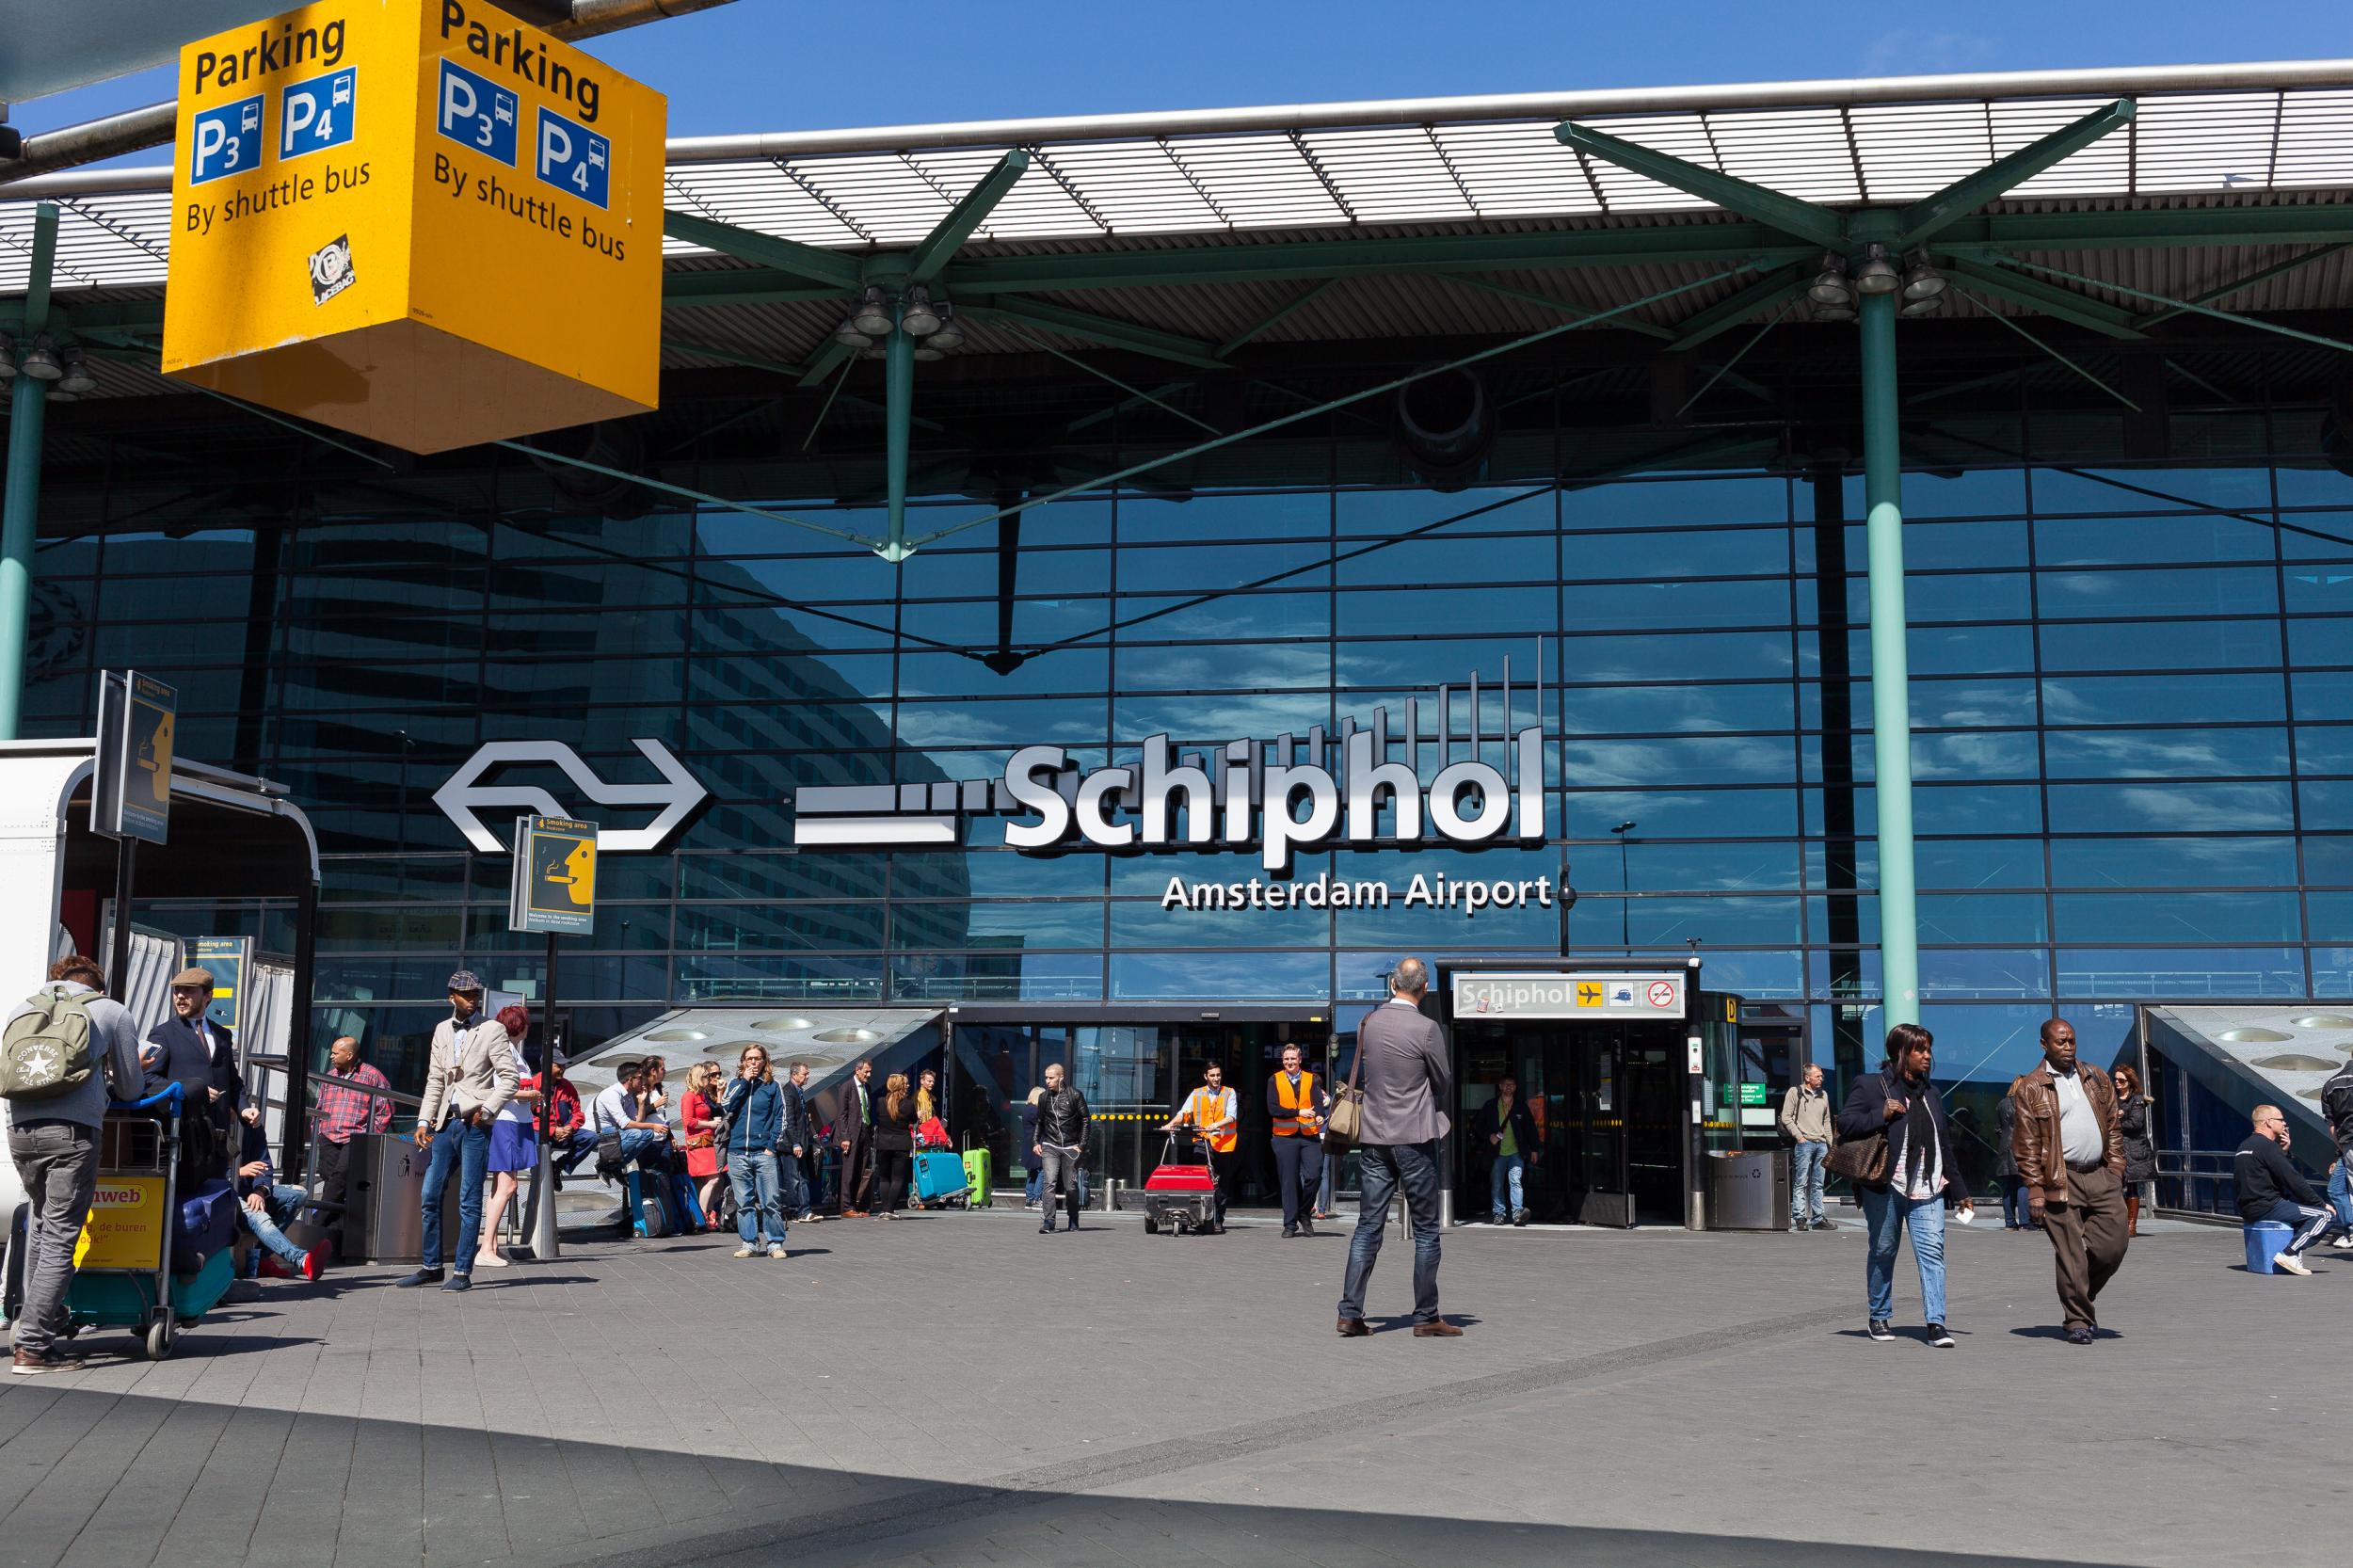 Amsterdam Schiphol is advising passengers not to travel to the airport today